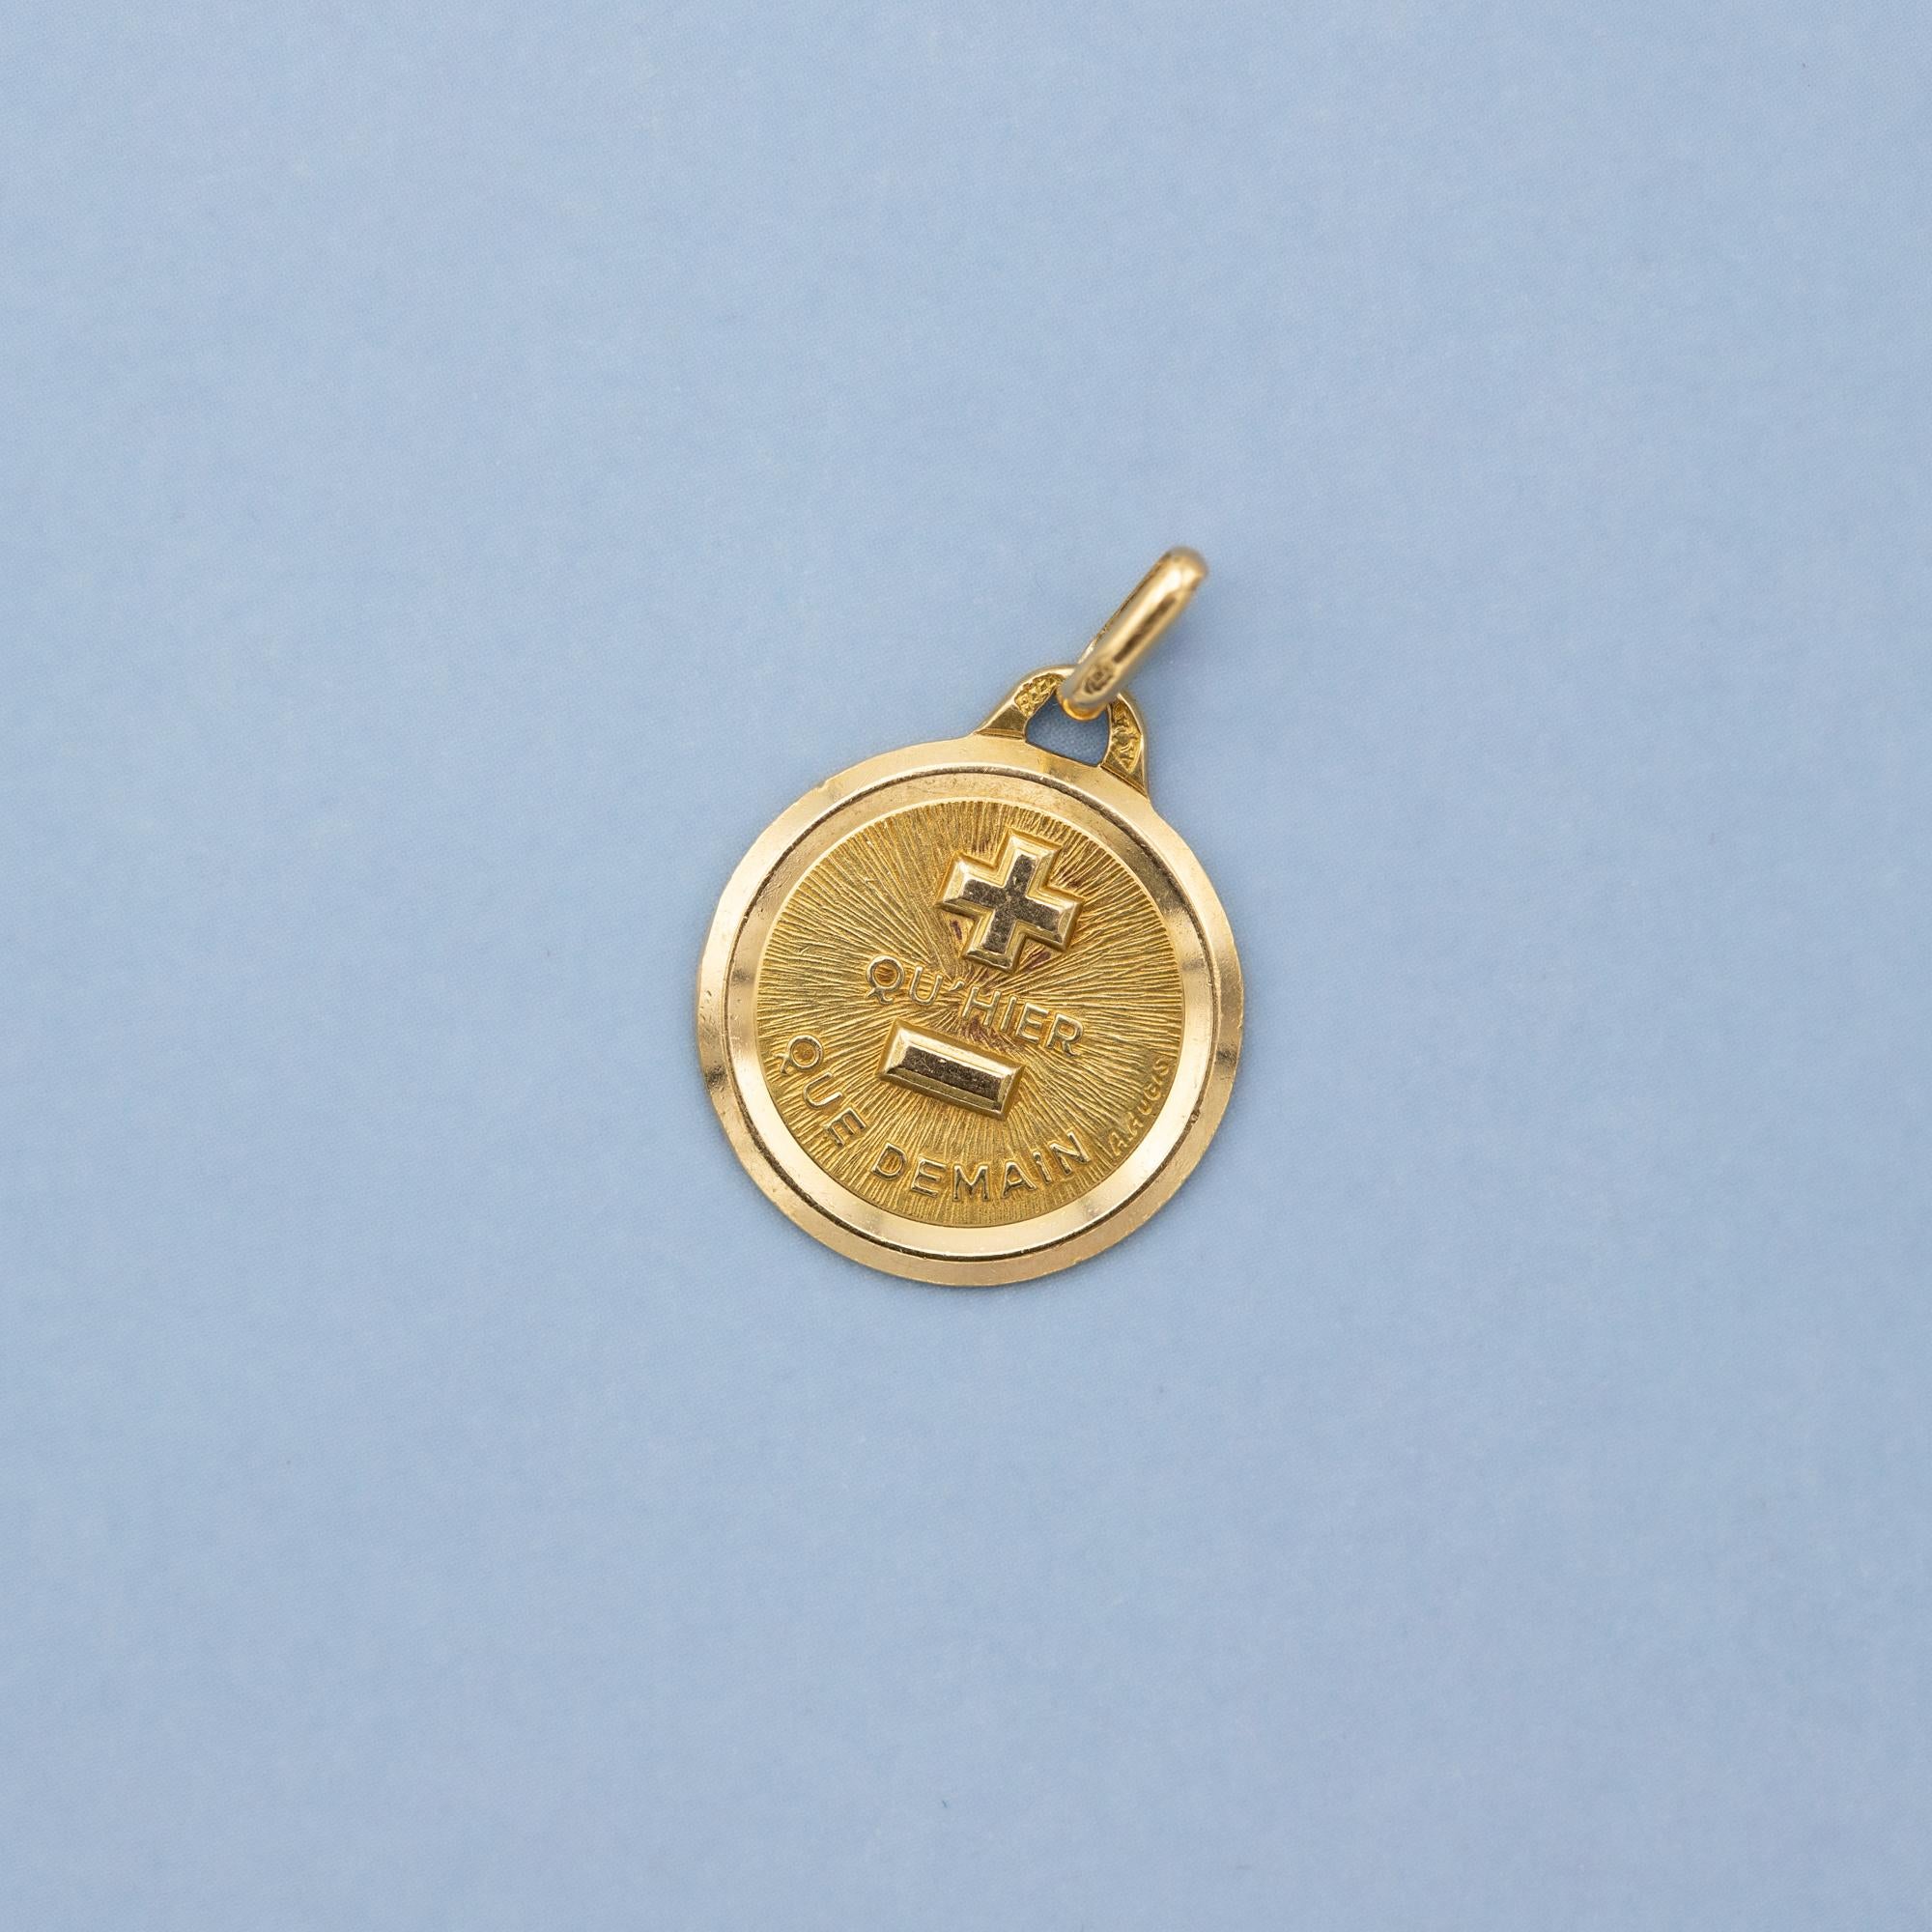 Plus qu'hier et moins que demain - Small Augis charm - 18k solid gold - love you In Good Condition For Sale In Antwerp, BE